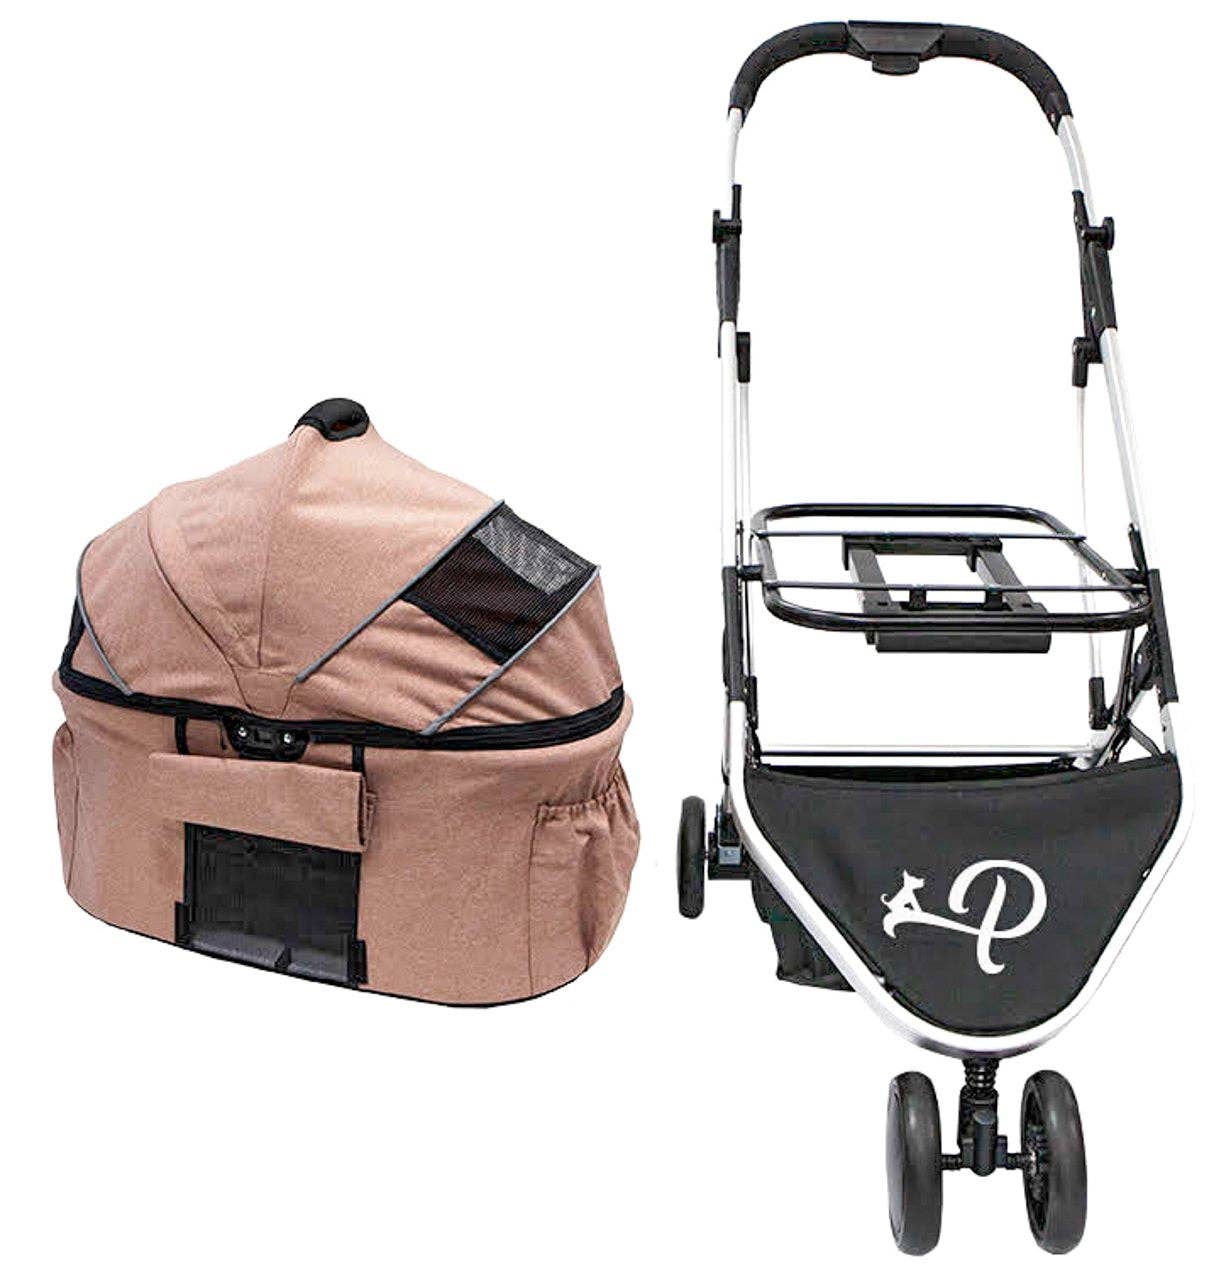 Load image into Gallery viewer, Petique, Inc - Newport Pet Stroller (3-in-1 Travel System)  Image
